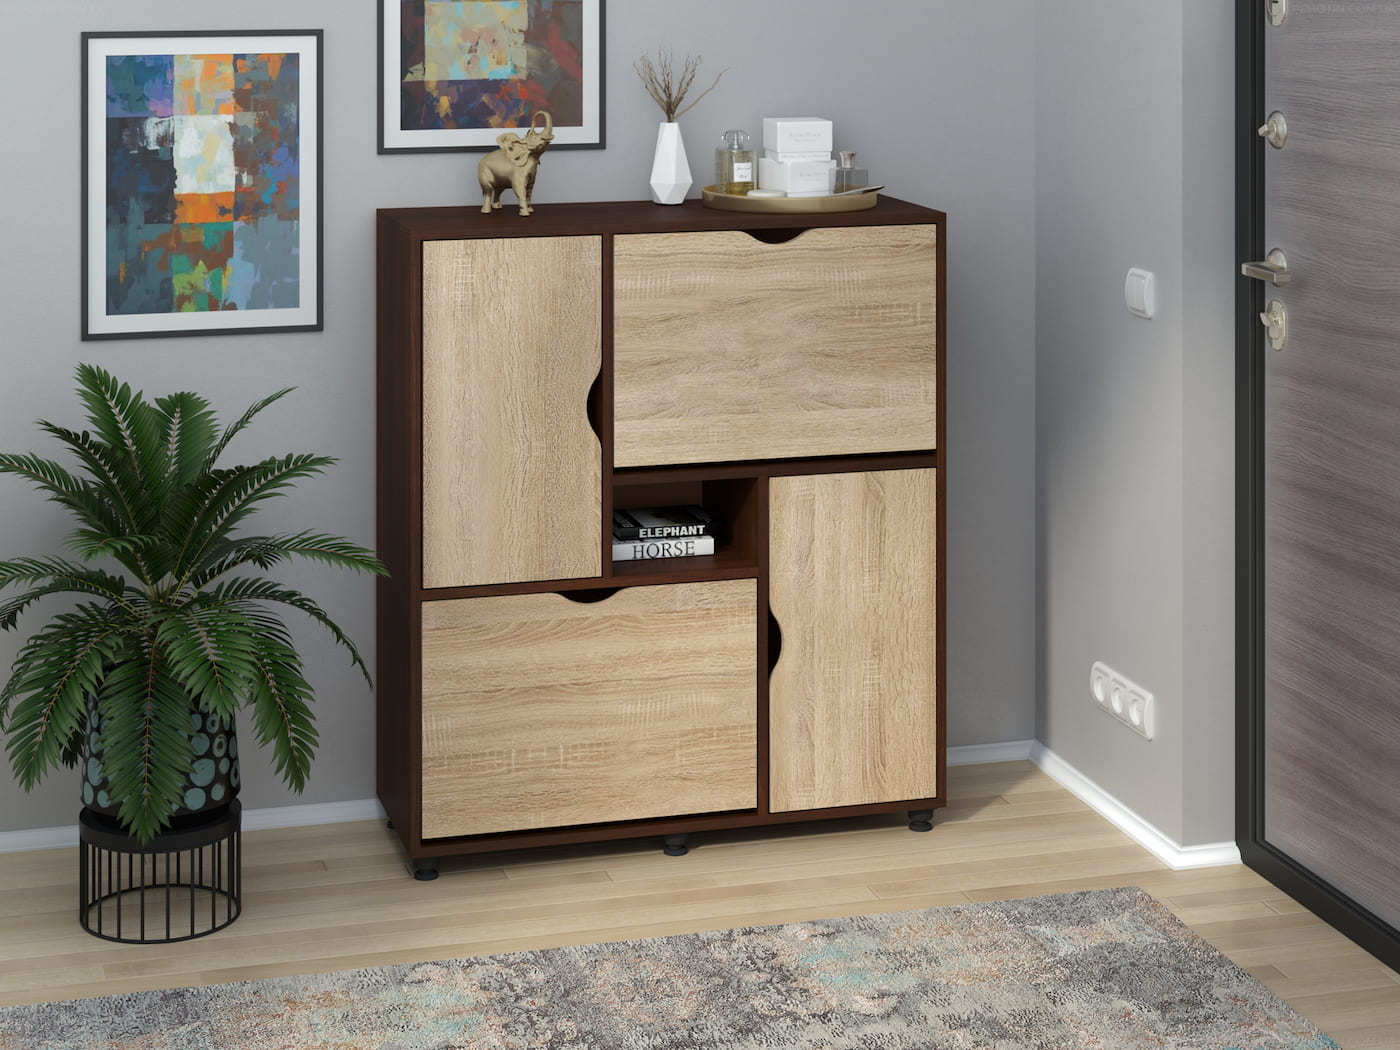 Cabinet for shoes